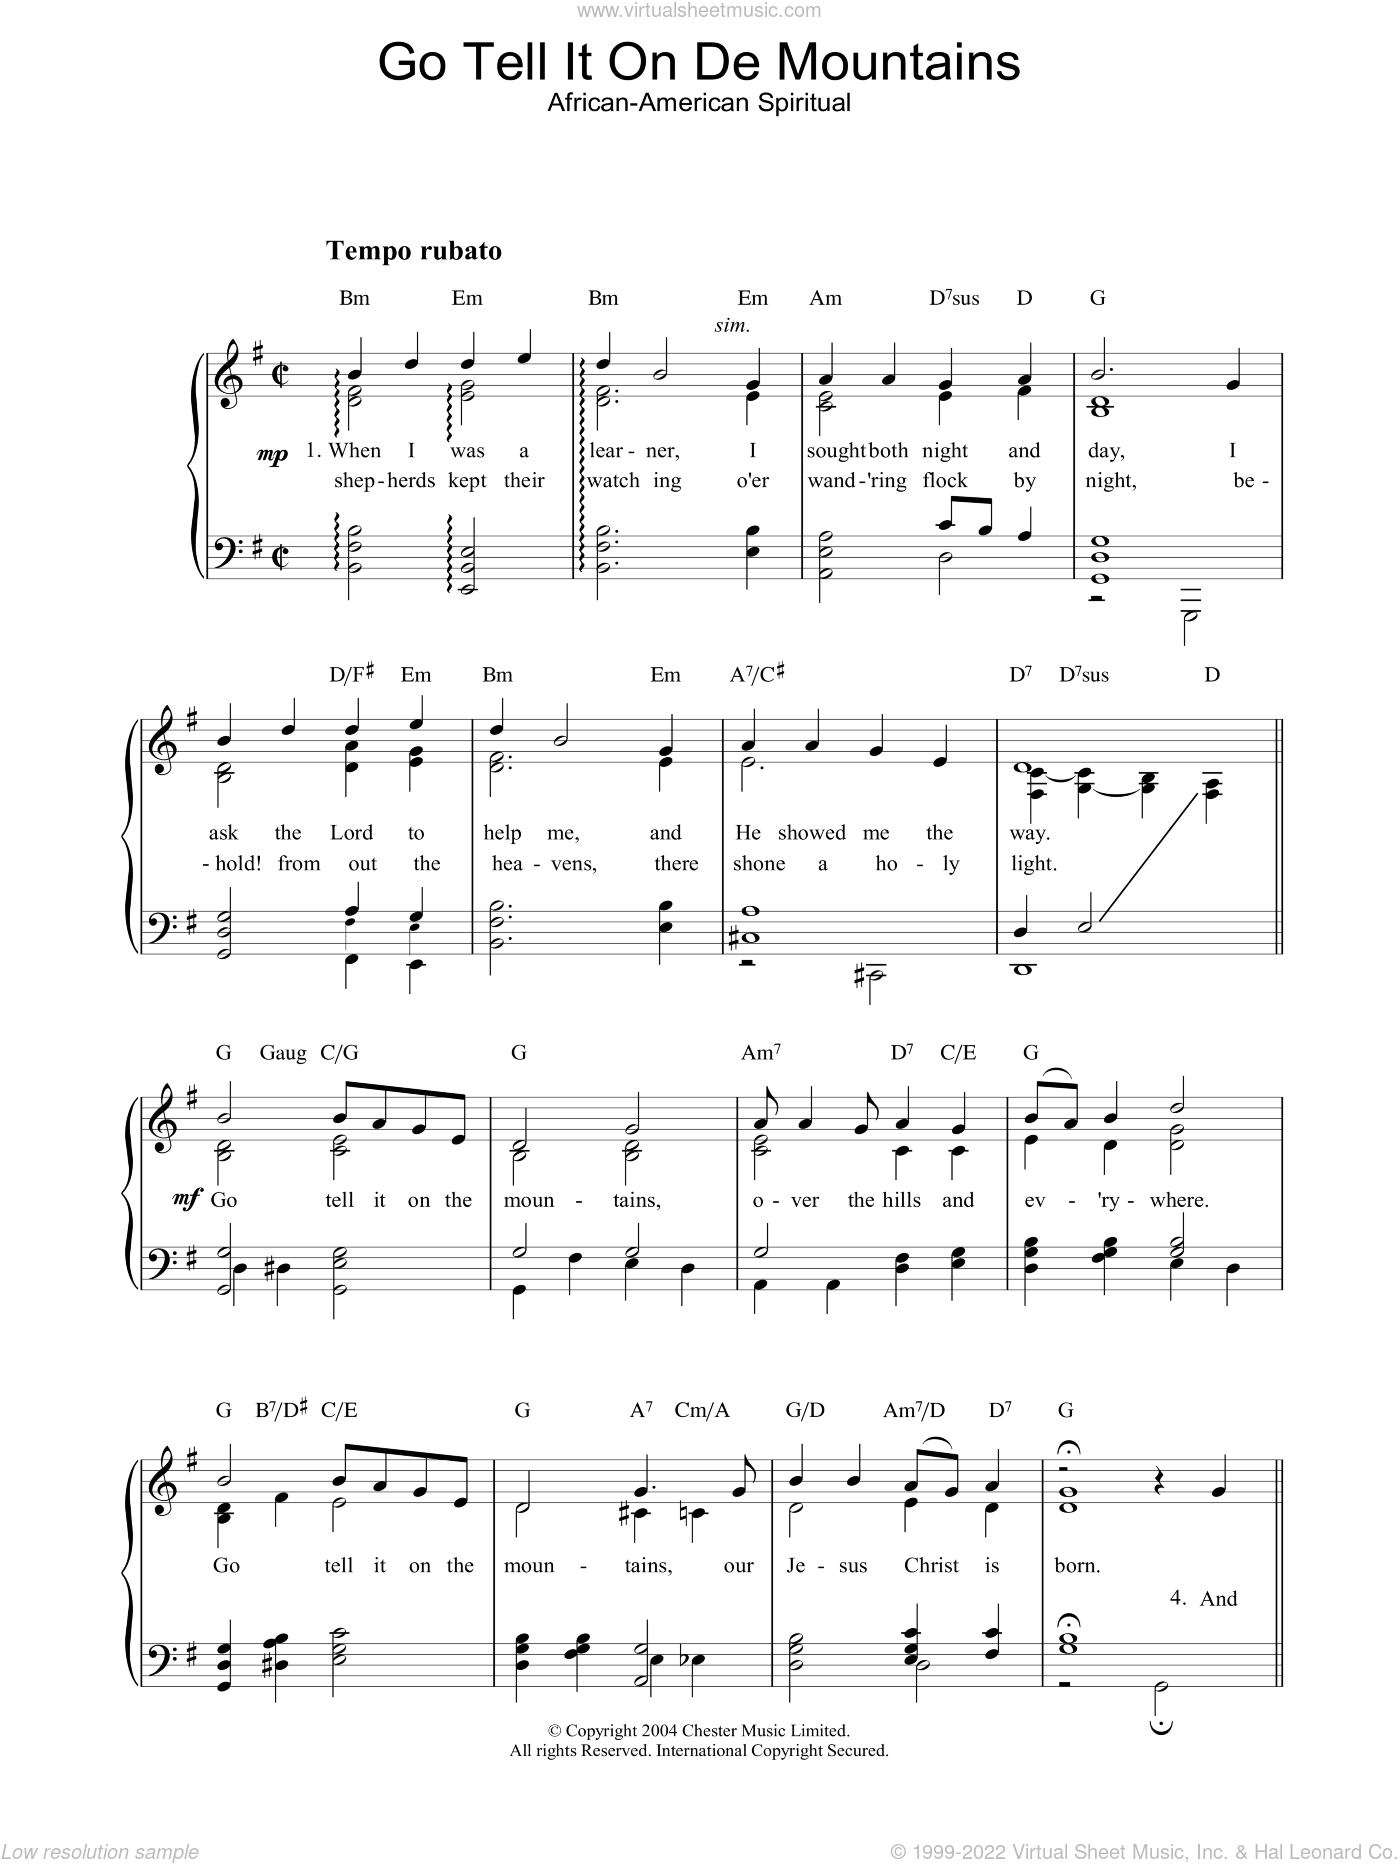 Go, Tell It On The Mountain by African-American Spiritual - Guitar Chords/Lyrics  - Guitar Instructor